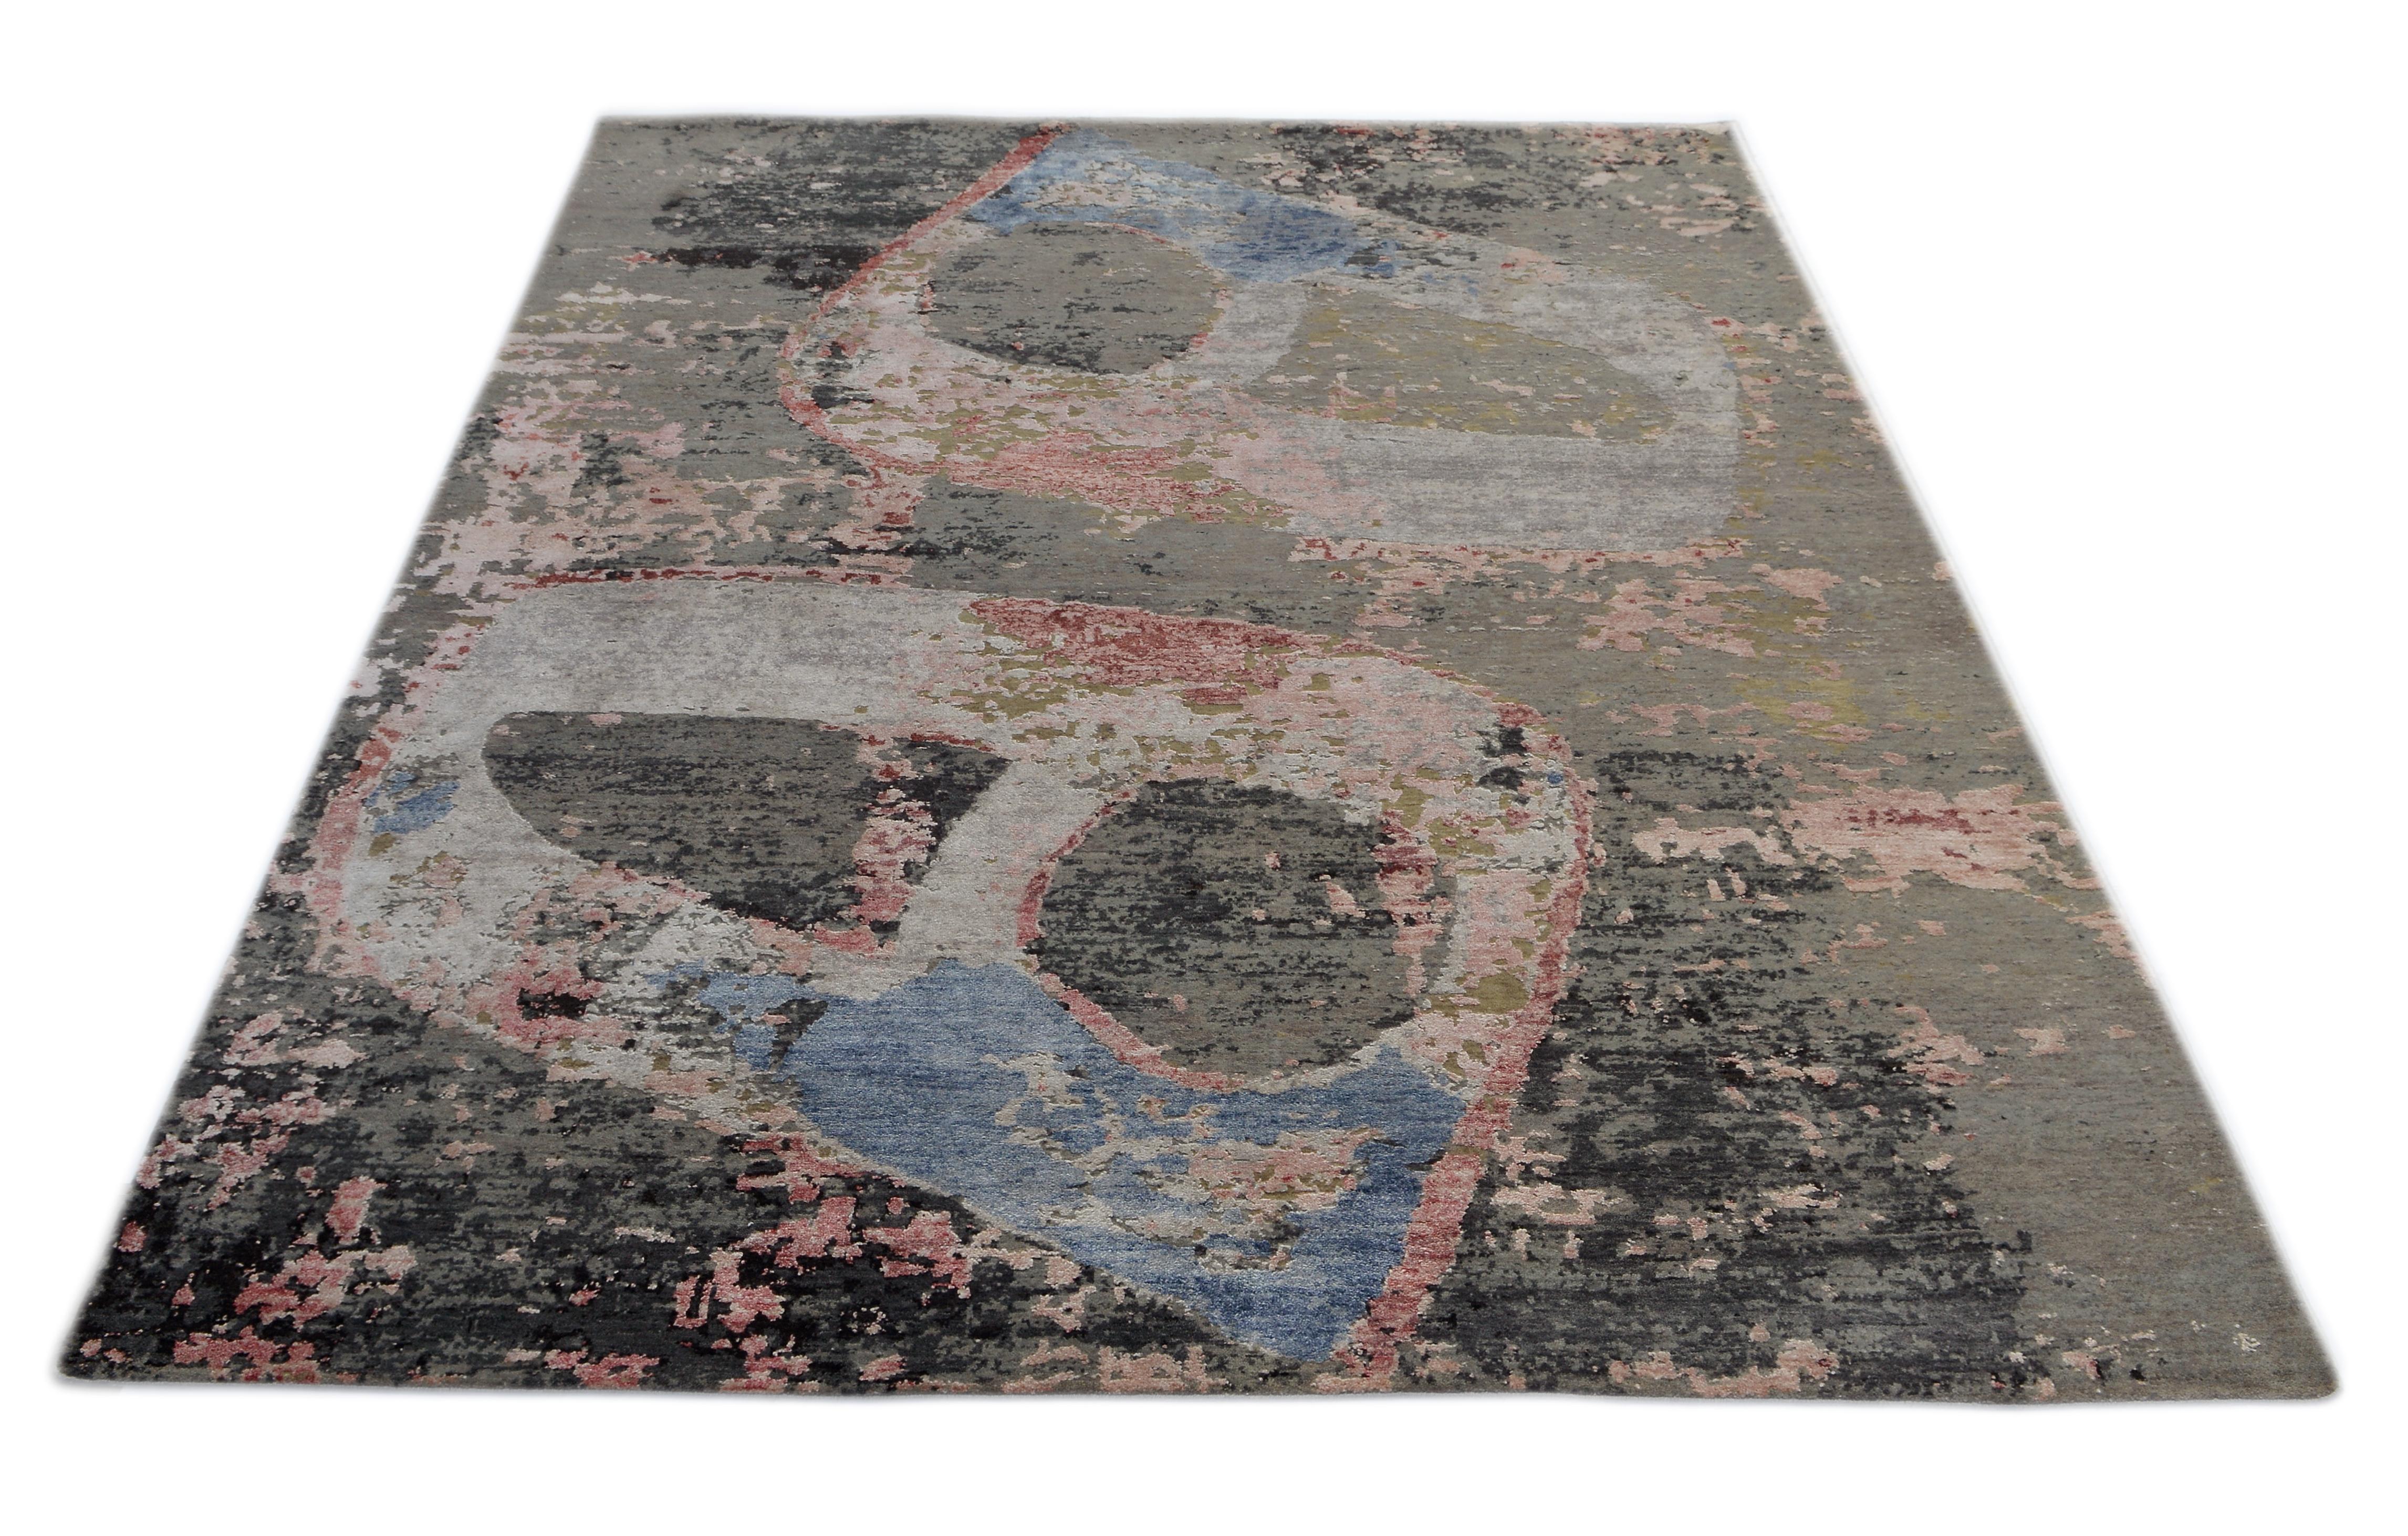 A new addition to the handmade rugs in the abstract rug line by Rug & Kilim, this 5'8” x 7'10' modern rug is hand knotted in a unique, proprietary blend of quality wool and silk, the natural luster of the latter bringing out modern hues of beige,